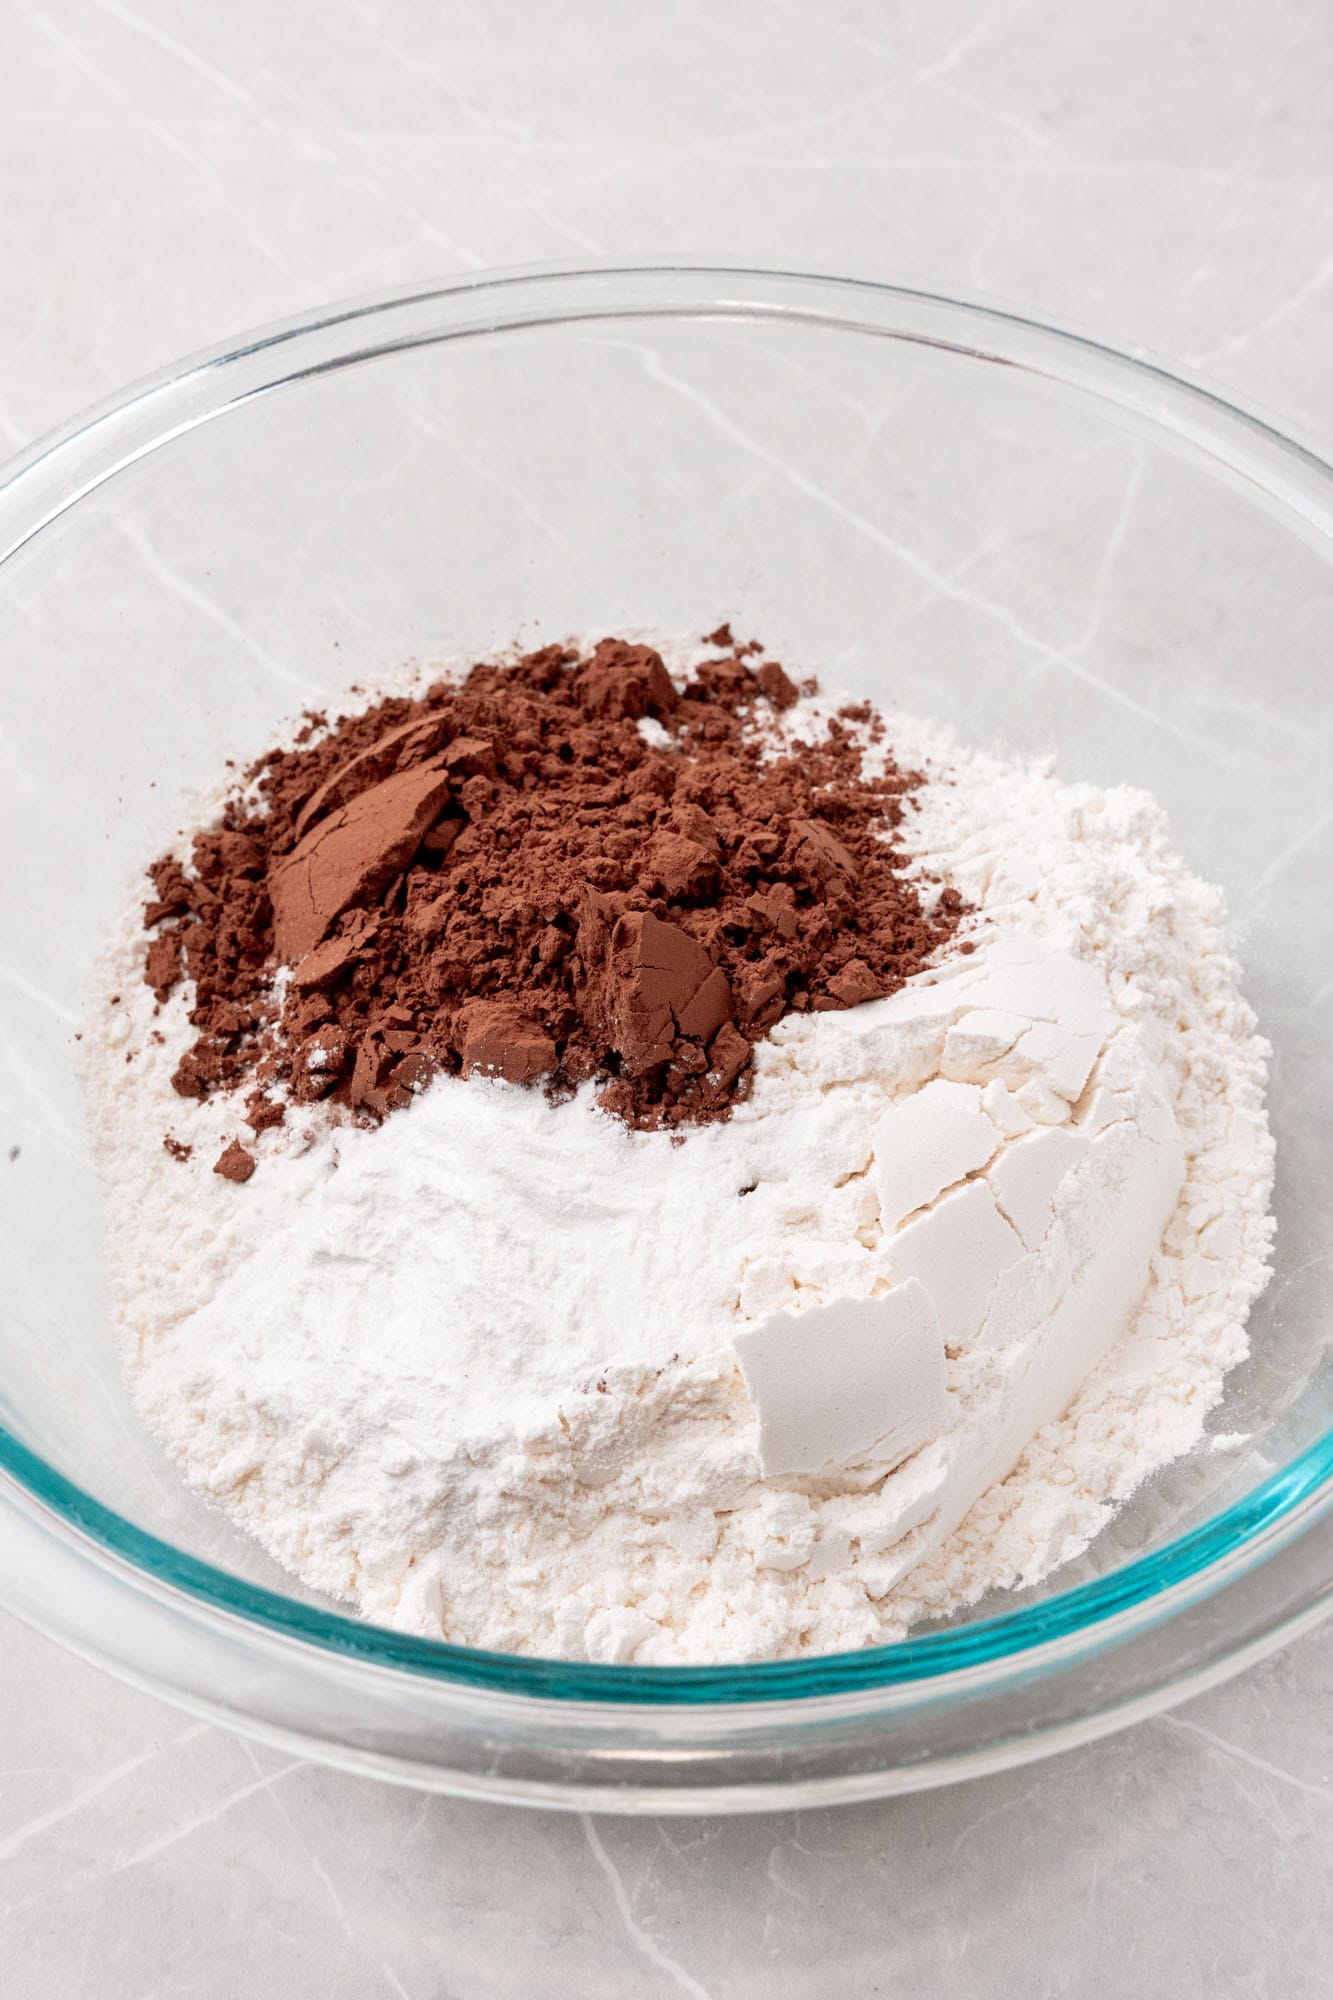 flour and cocoa powder in a glass mixing bowl on a marble counter.